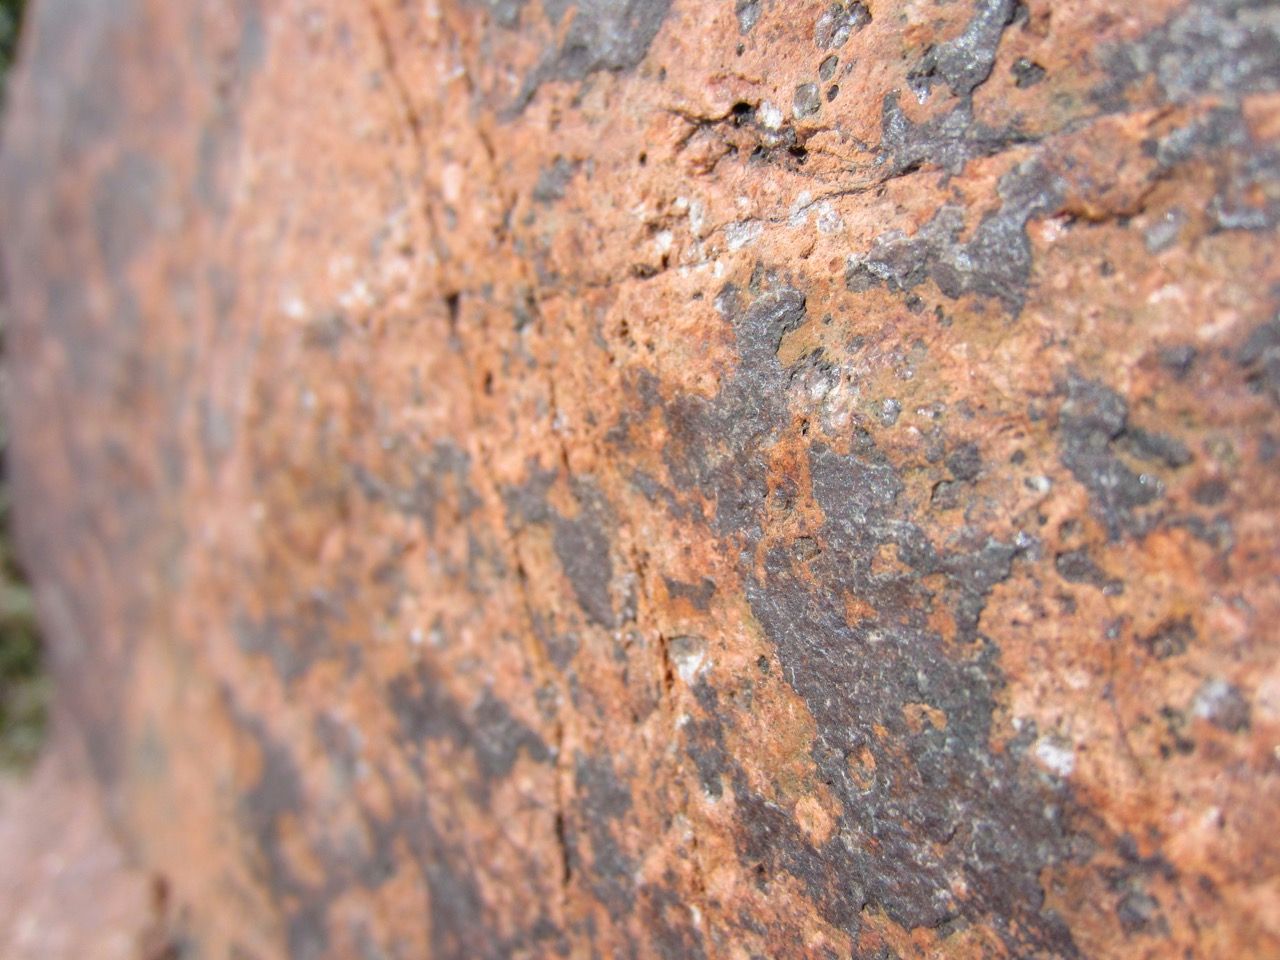 A close-up of a rock showing its texture.